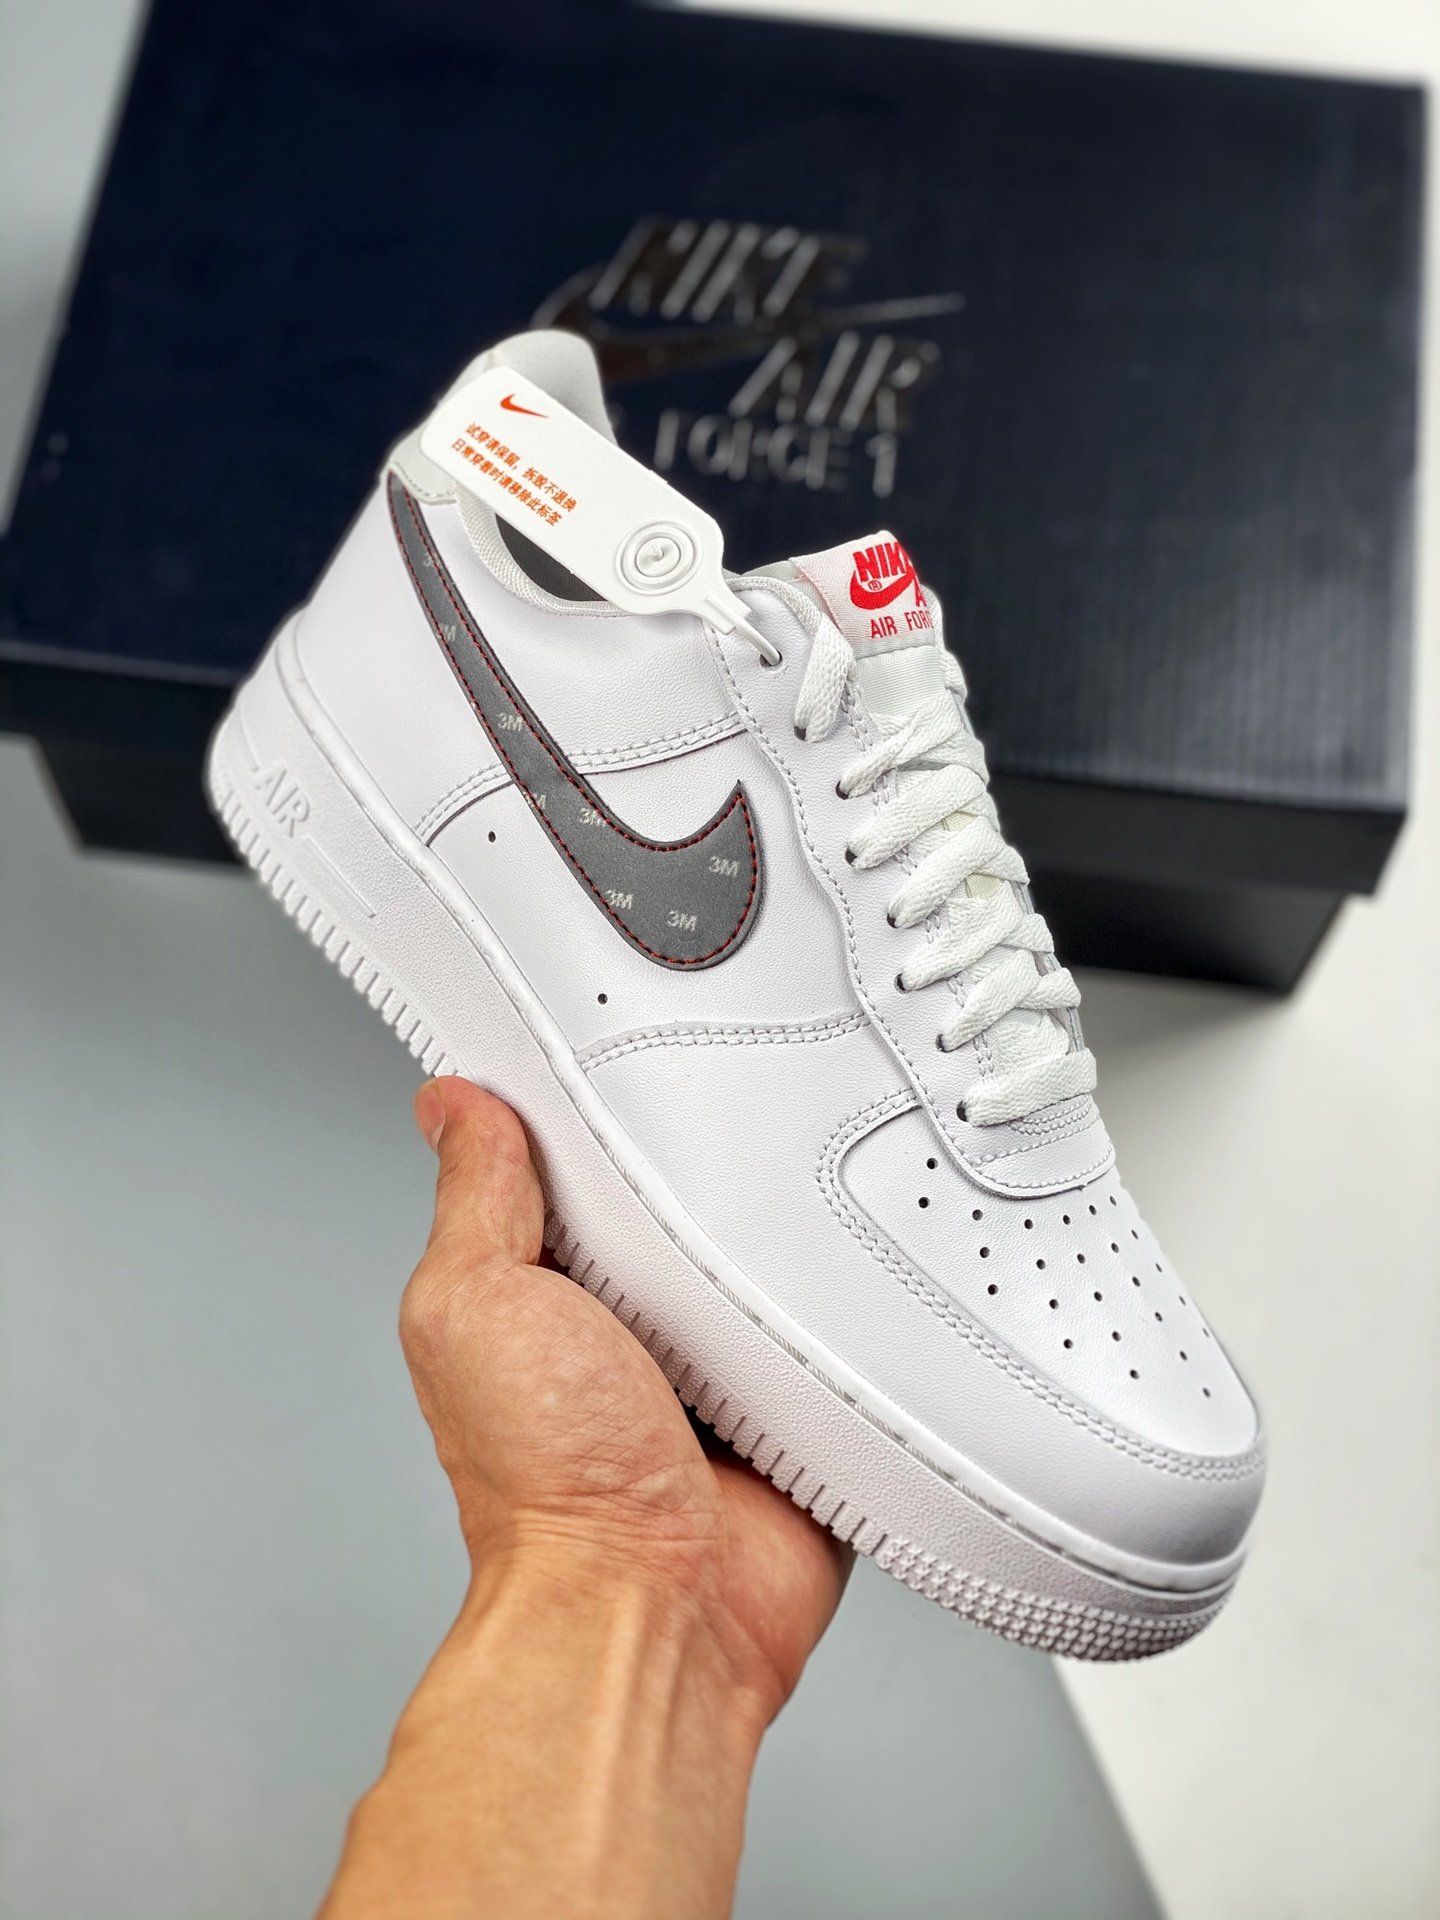 3M x Nike Air AF Force 1 White Reflective Logo CT2296-100 Shoes